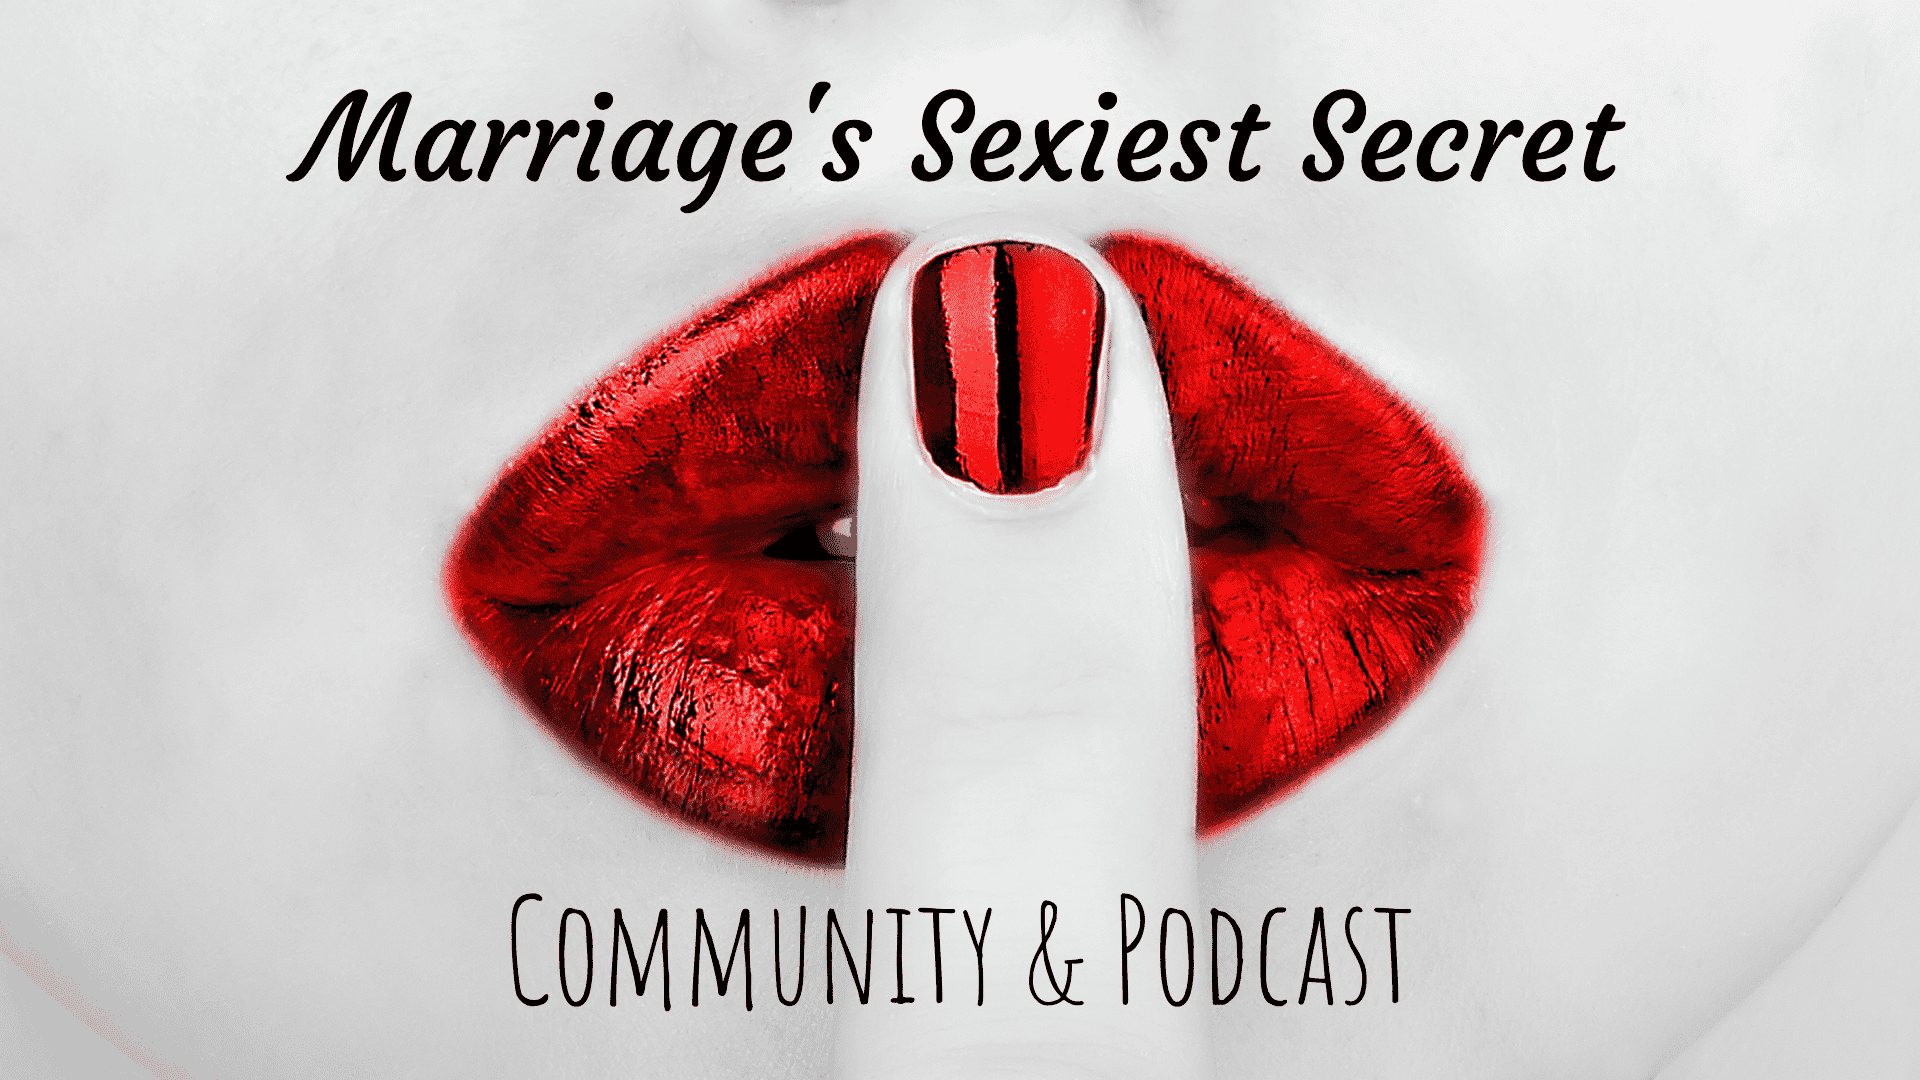 Marriages Sexiest Secret Featured Image